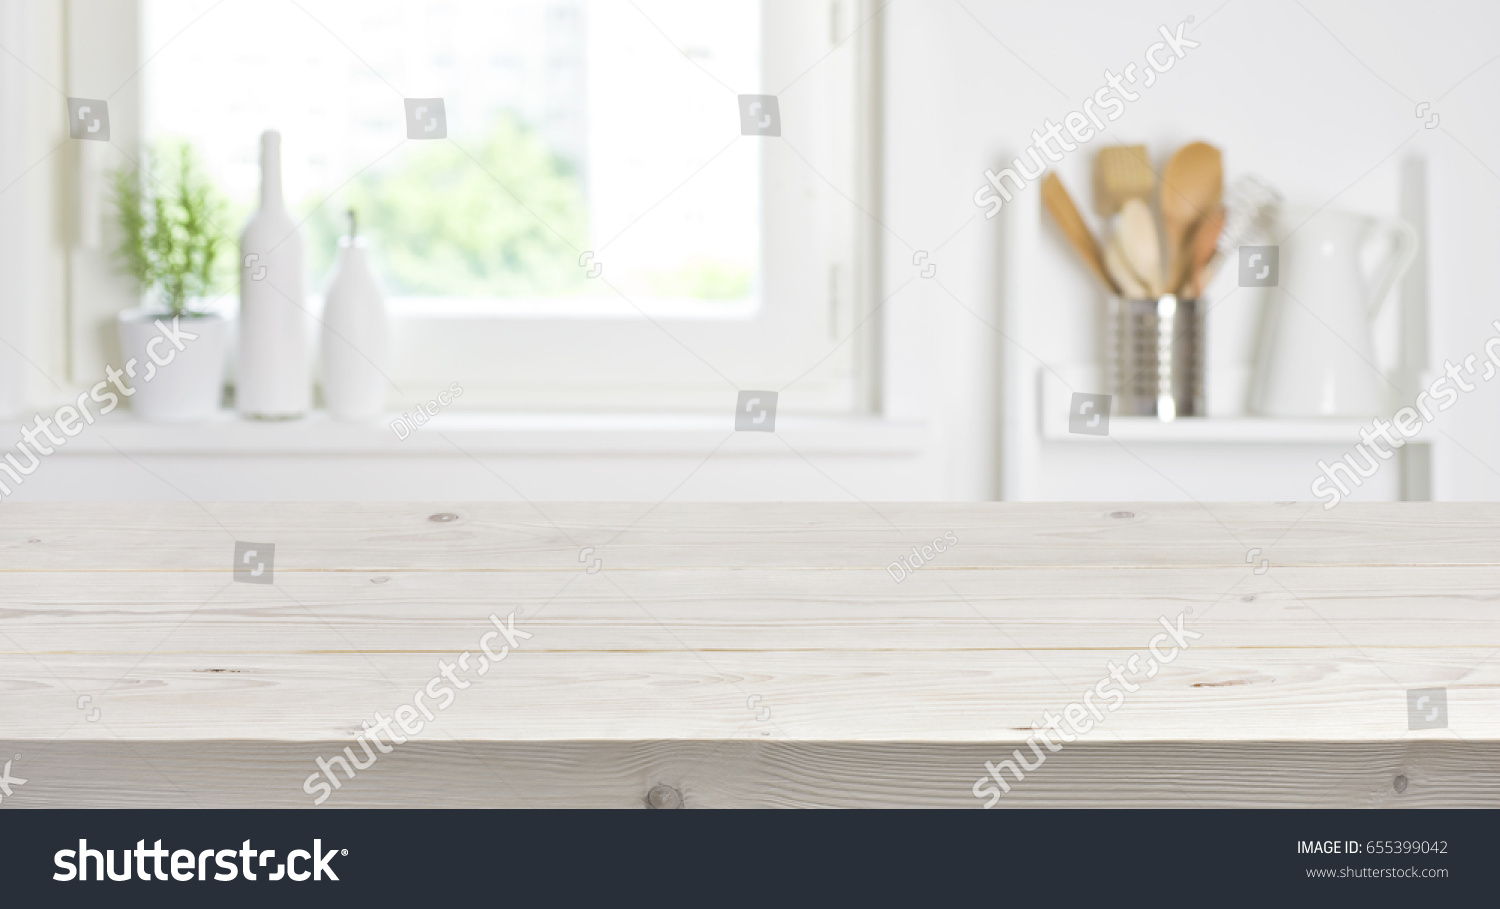 Wooden table on blurred background of kitchen window and shelves #655399042